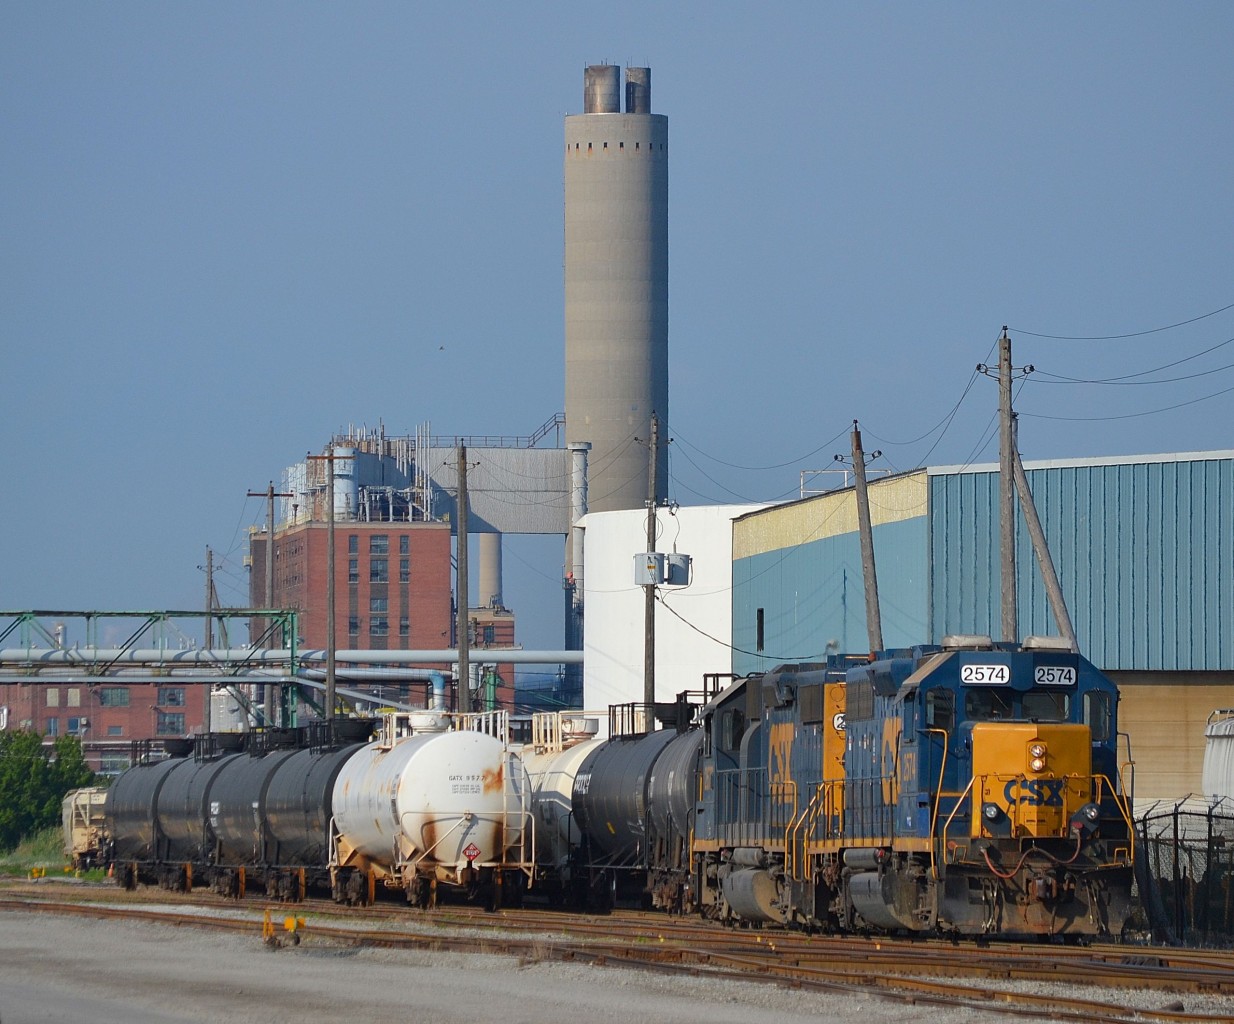 The CSX to CN Daily transfer starts off its day shunting cars after just pulling out of its shops.